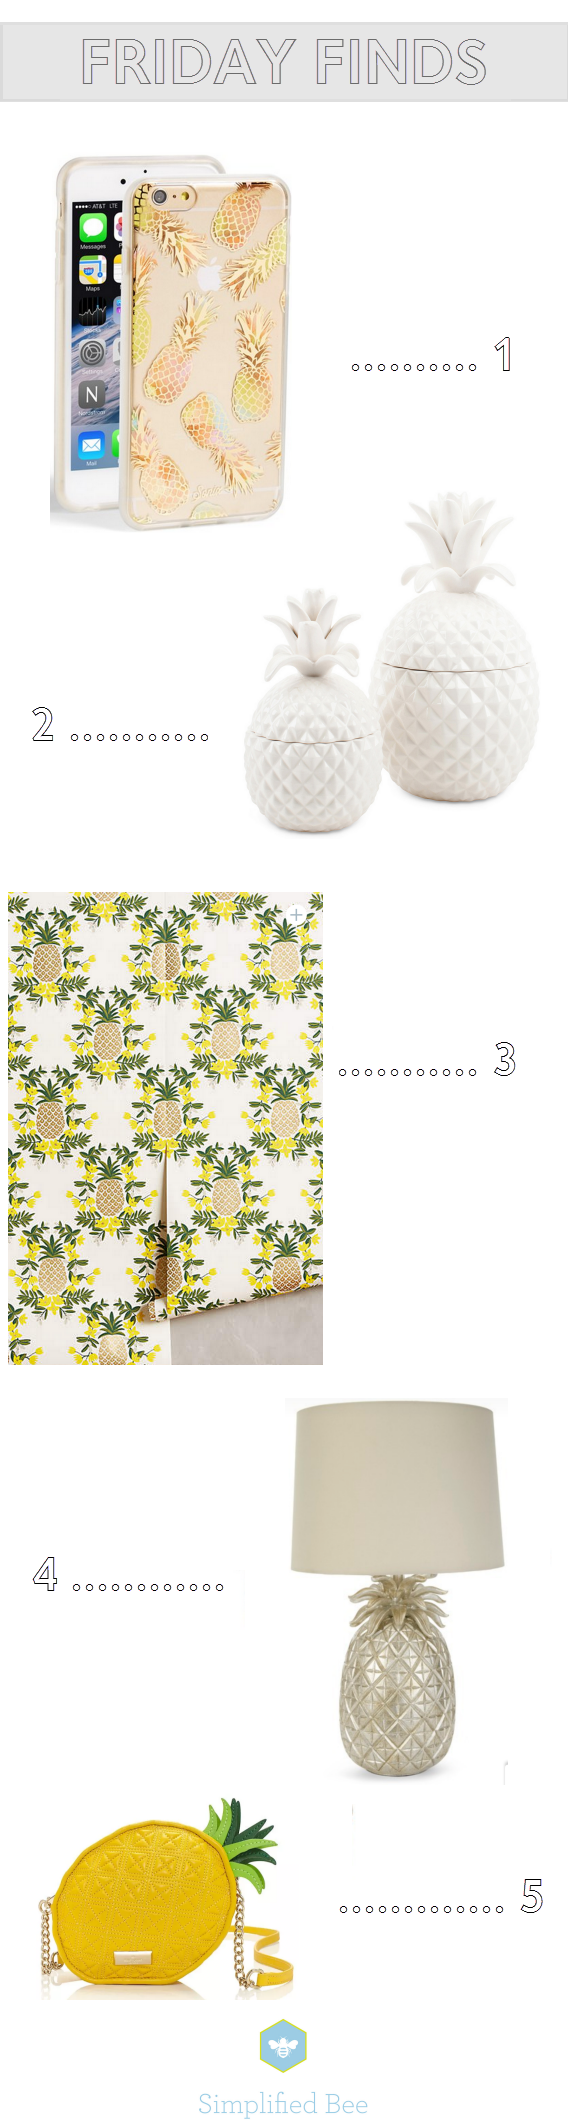 pineapple decor // friday finds// www.simplifiedbee.com